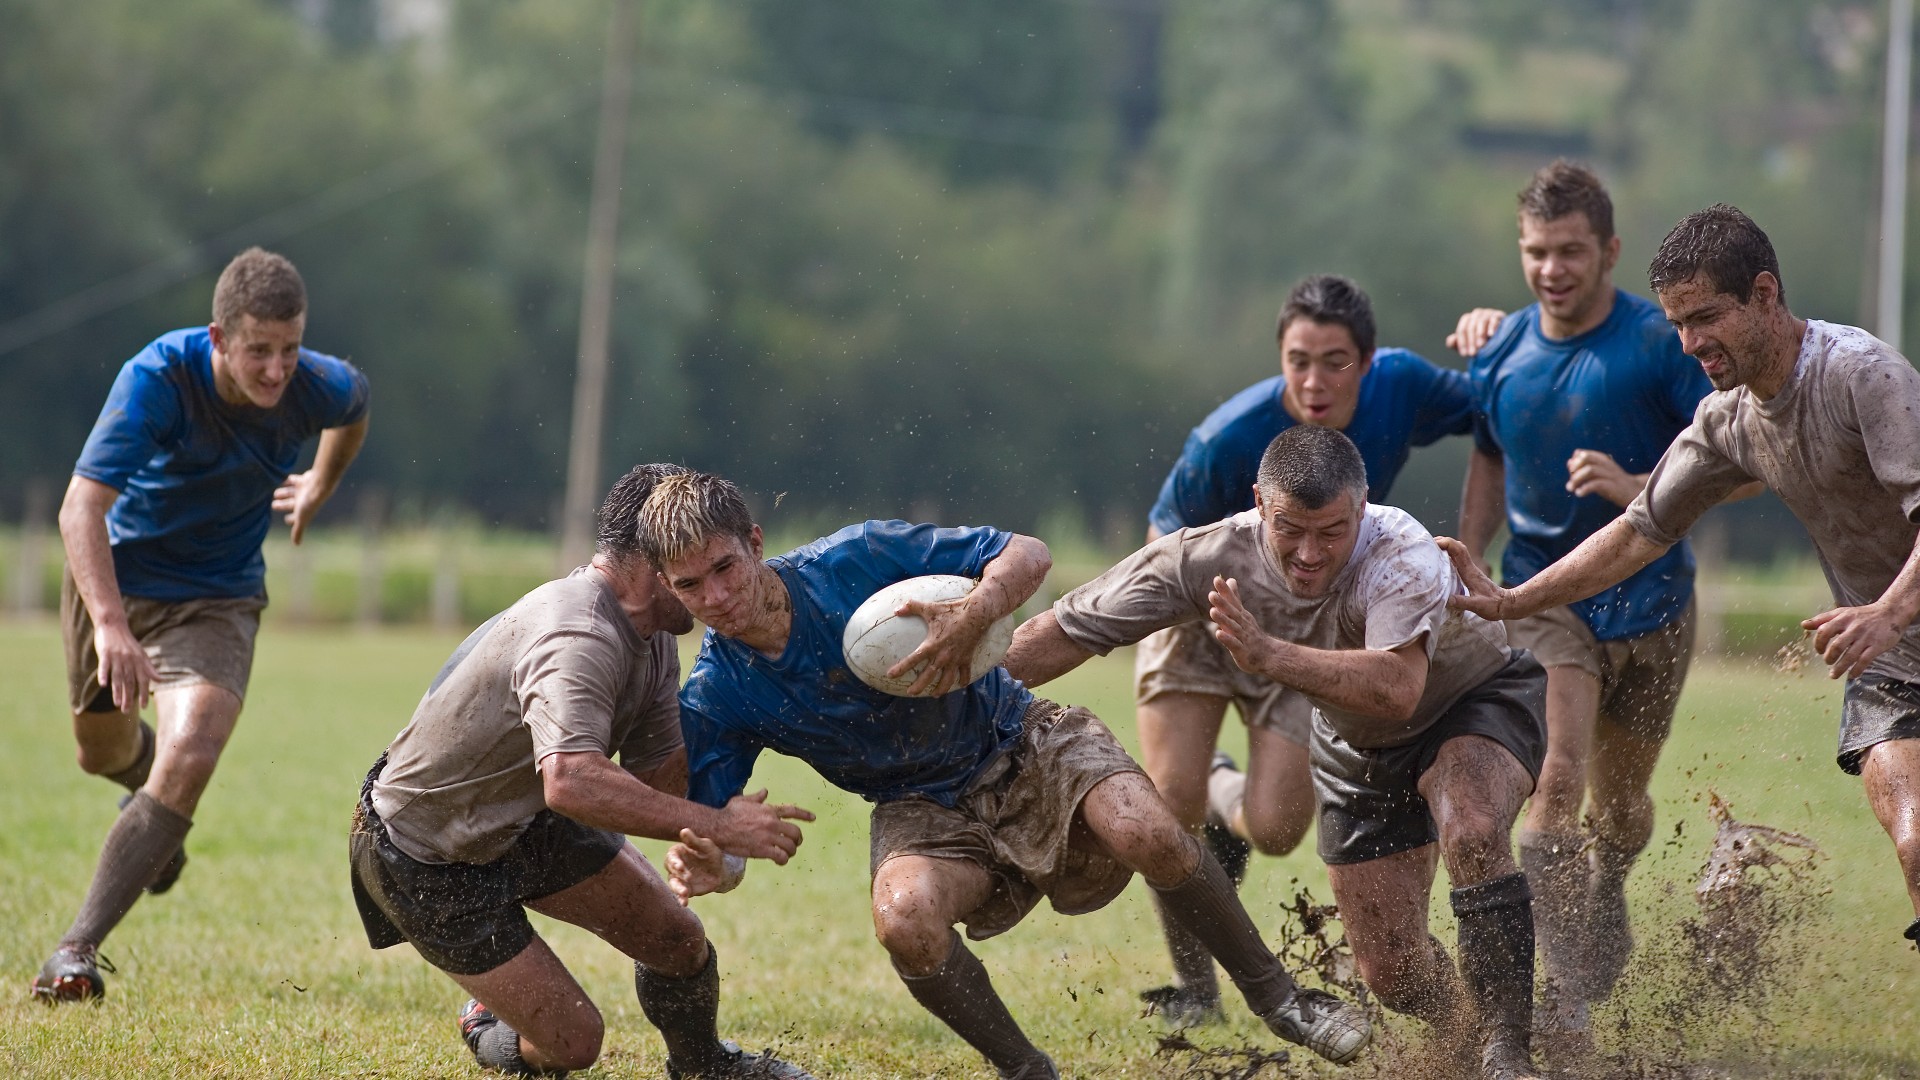 image of men playing rugby tackling eachother on a field